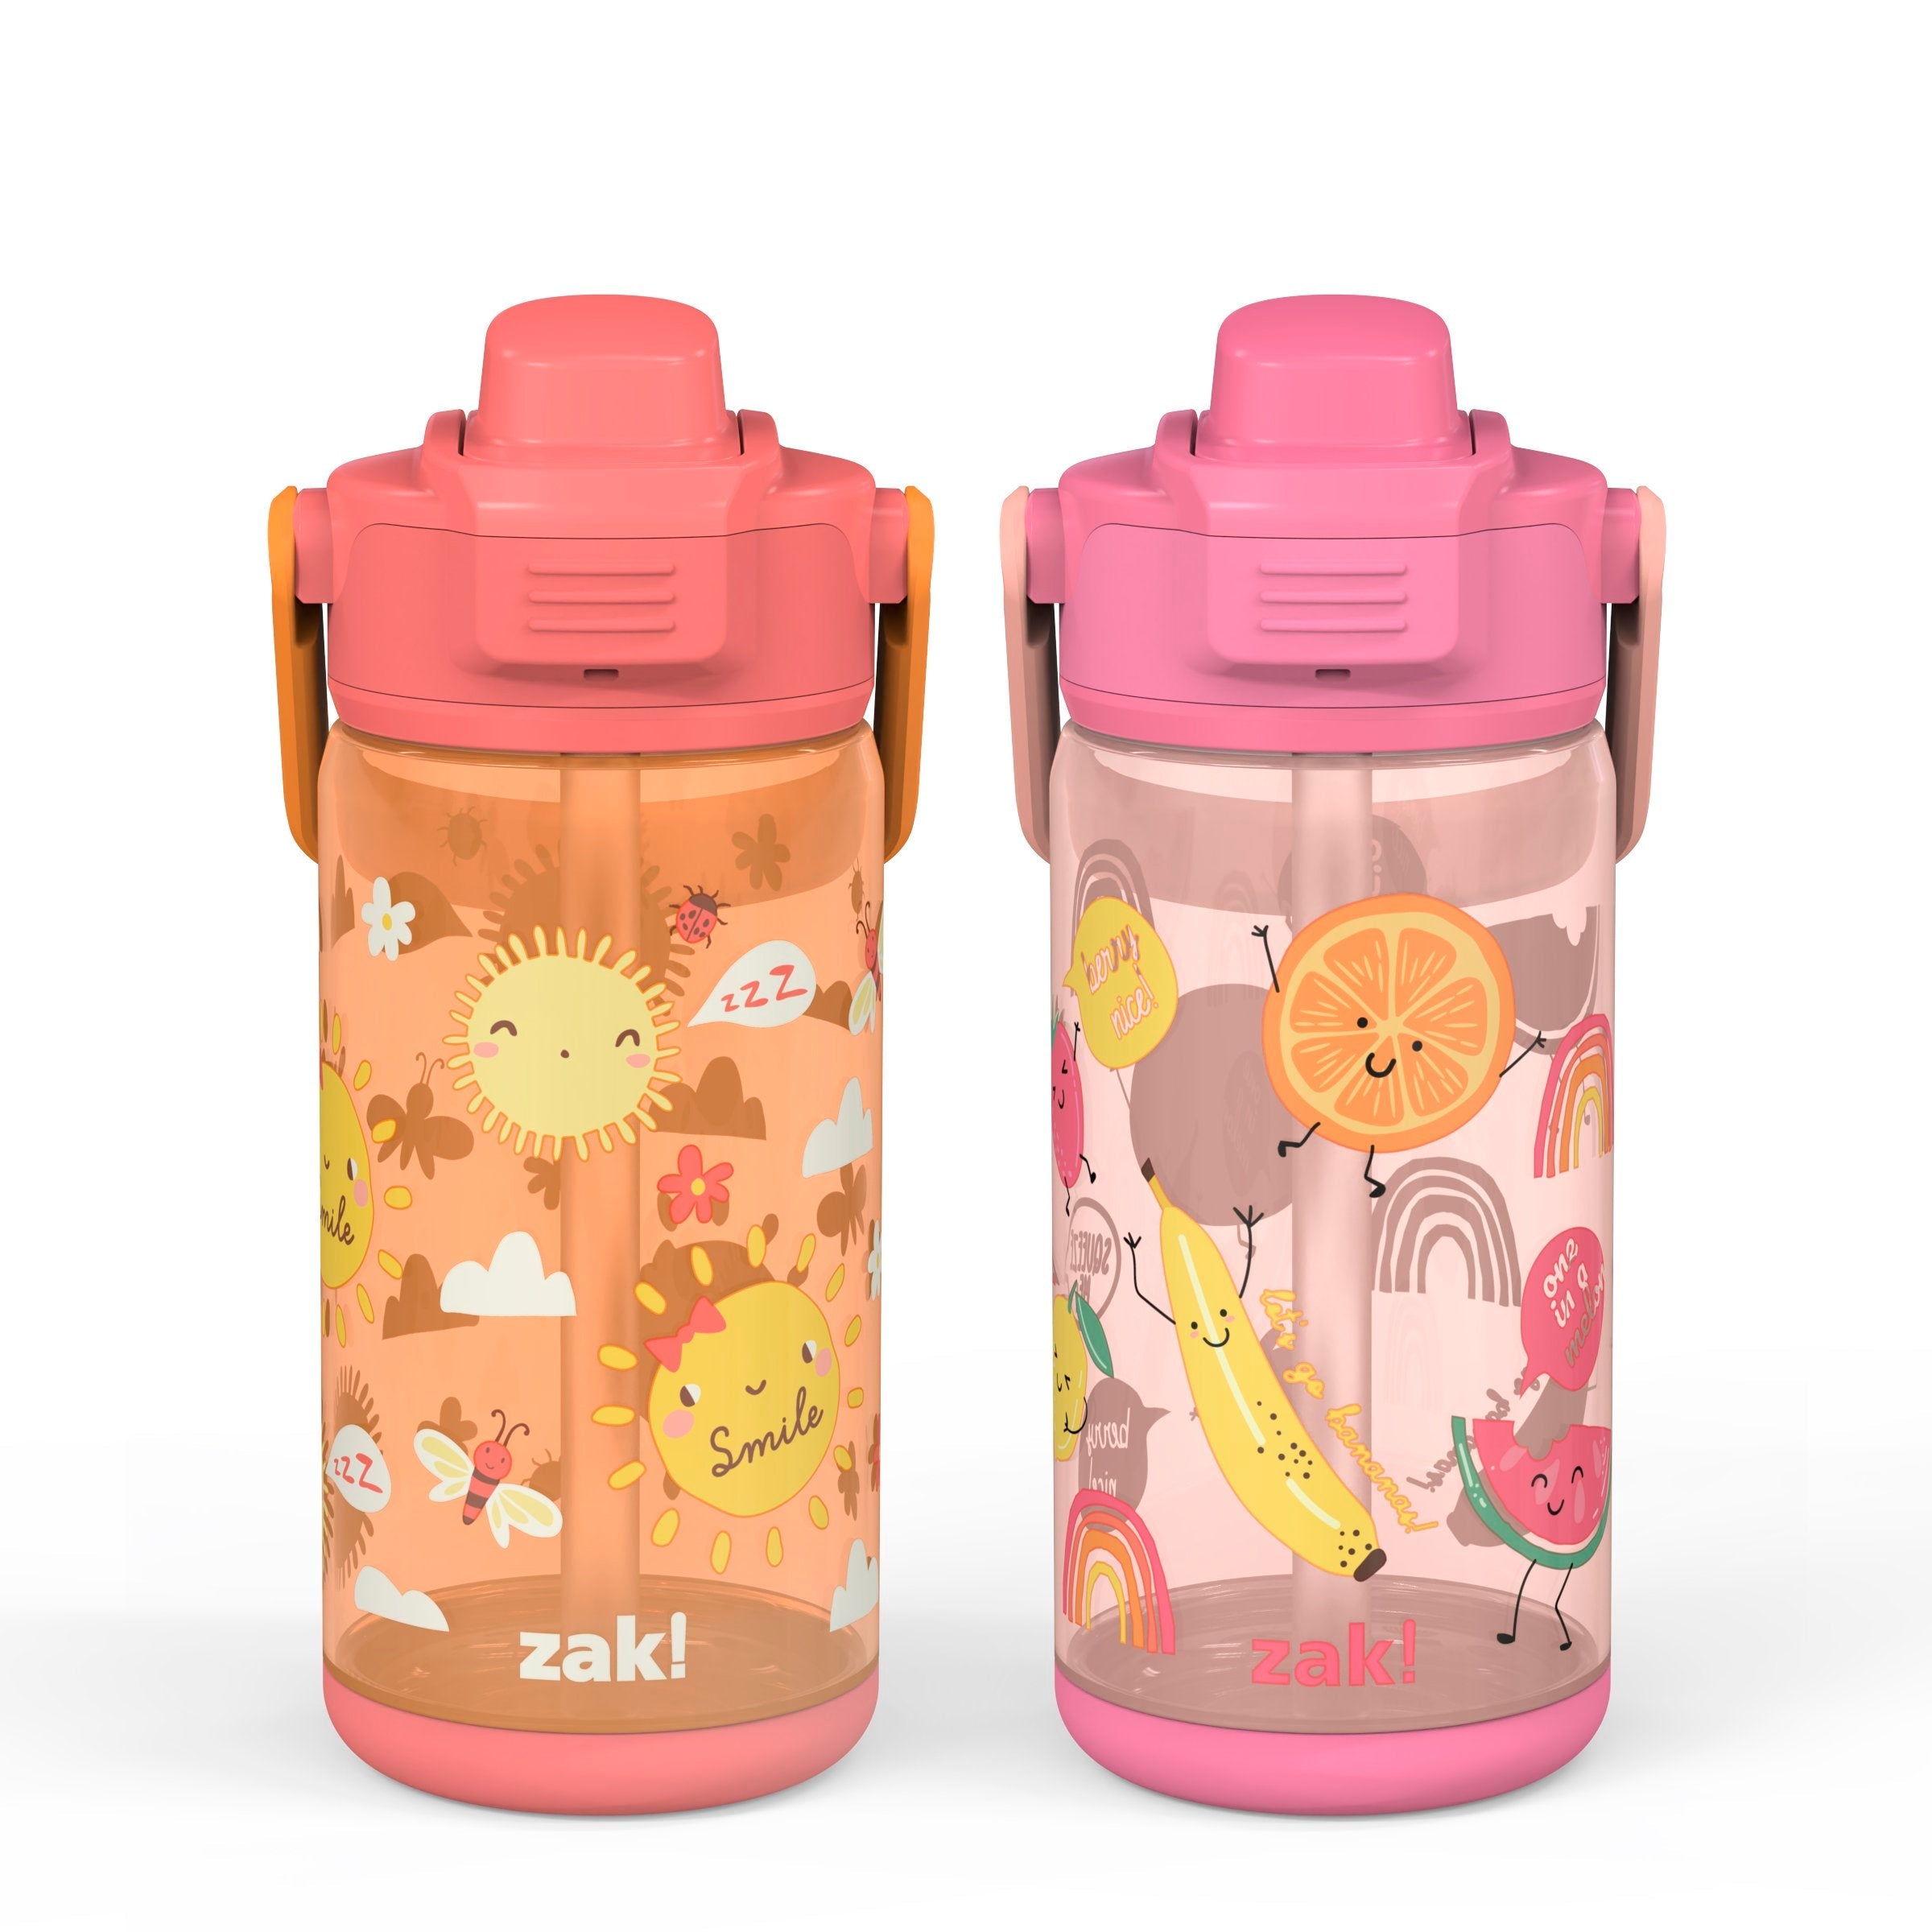 Beacon 2-Piece Kids Water Bottle Set with Covered Spout - Happy Skies and Happy Fruit, 16 Ounces